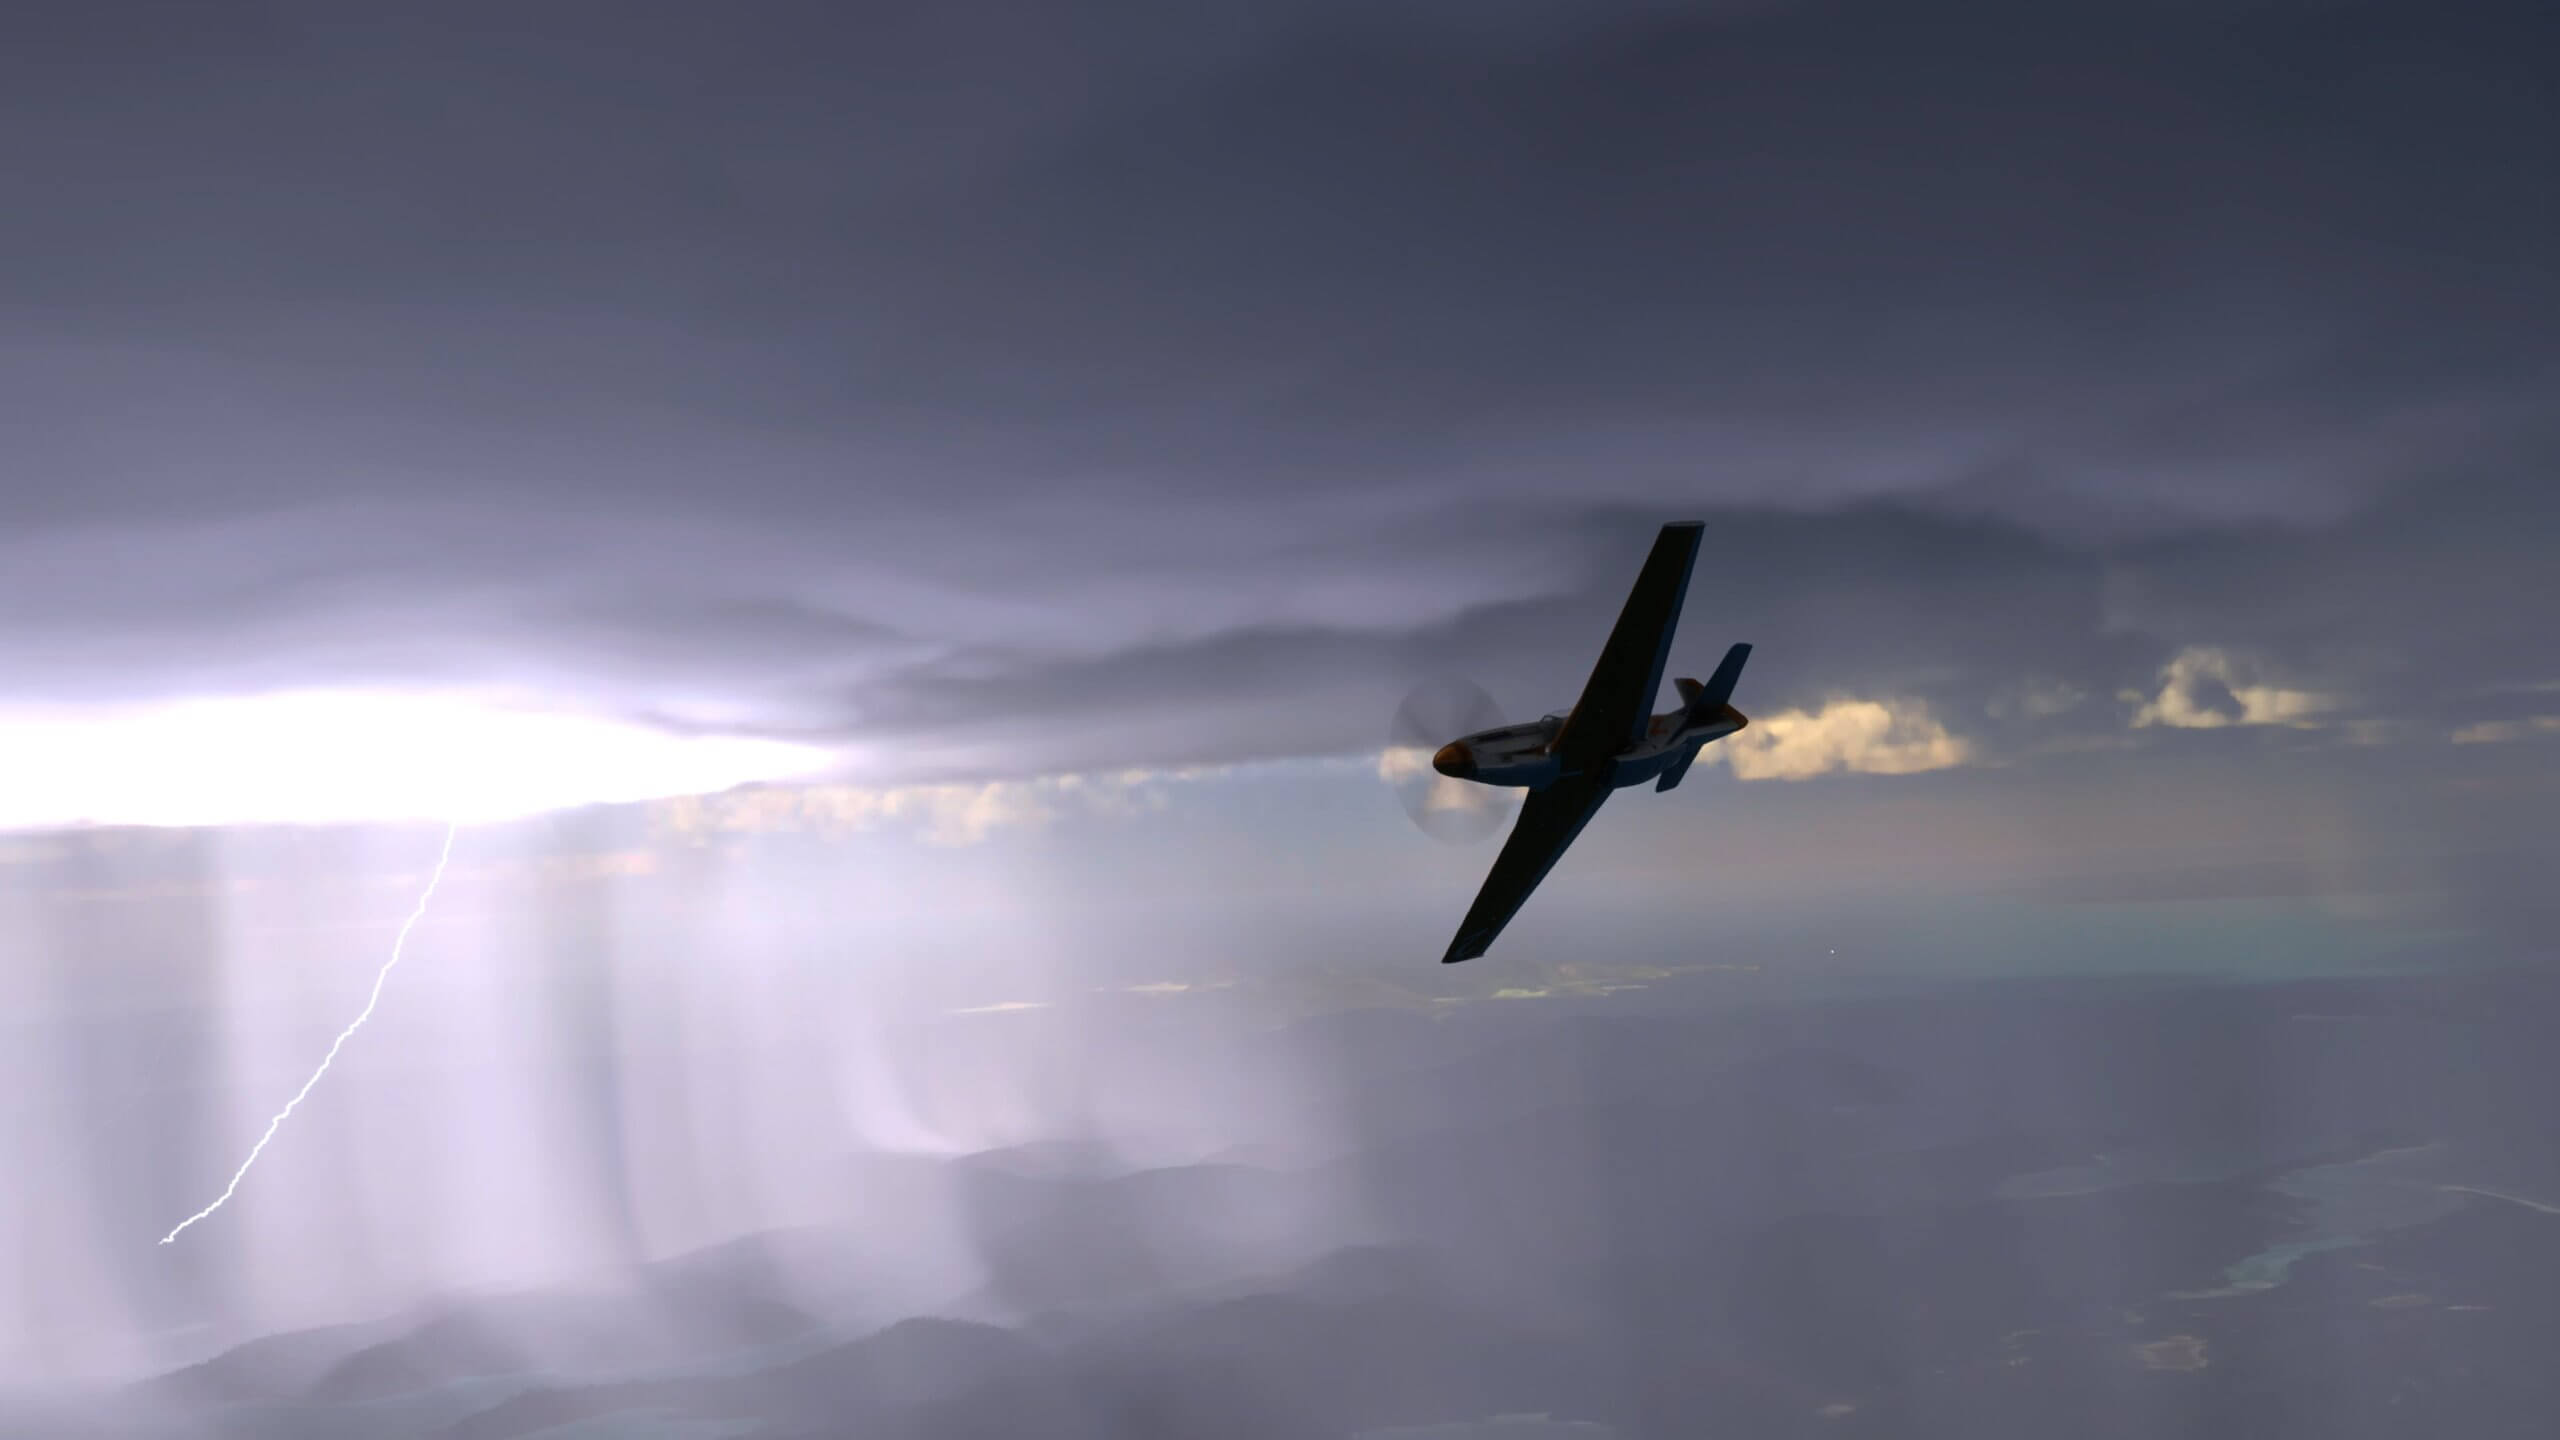 A P-51 banks harshly to the right underneath overcast clouds, as rain showers get lit up by lightning.